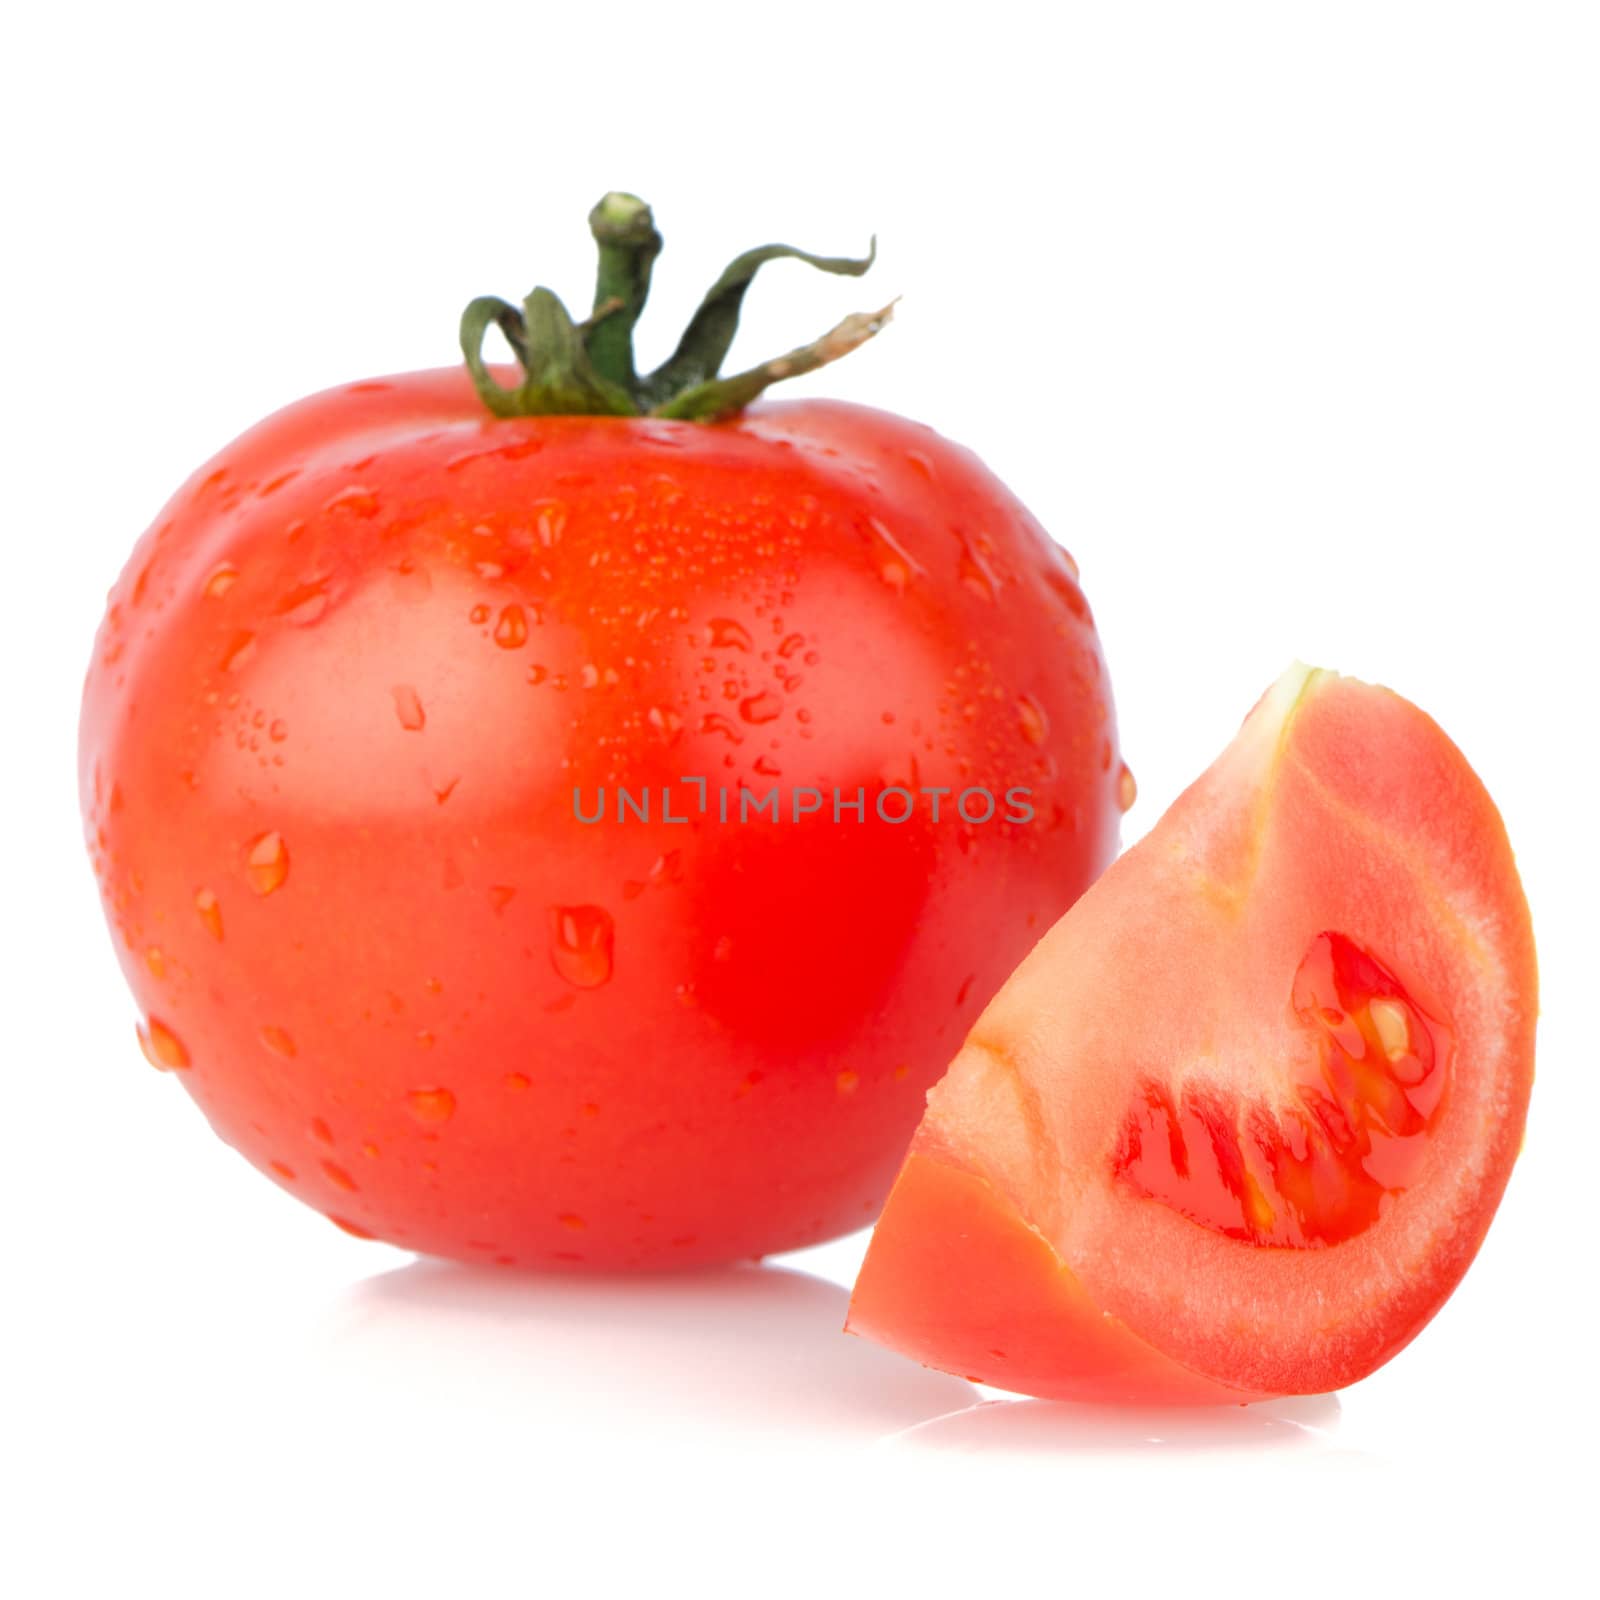 Red tomato isolated on white background.